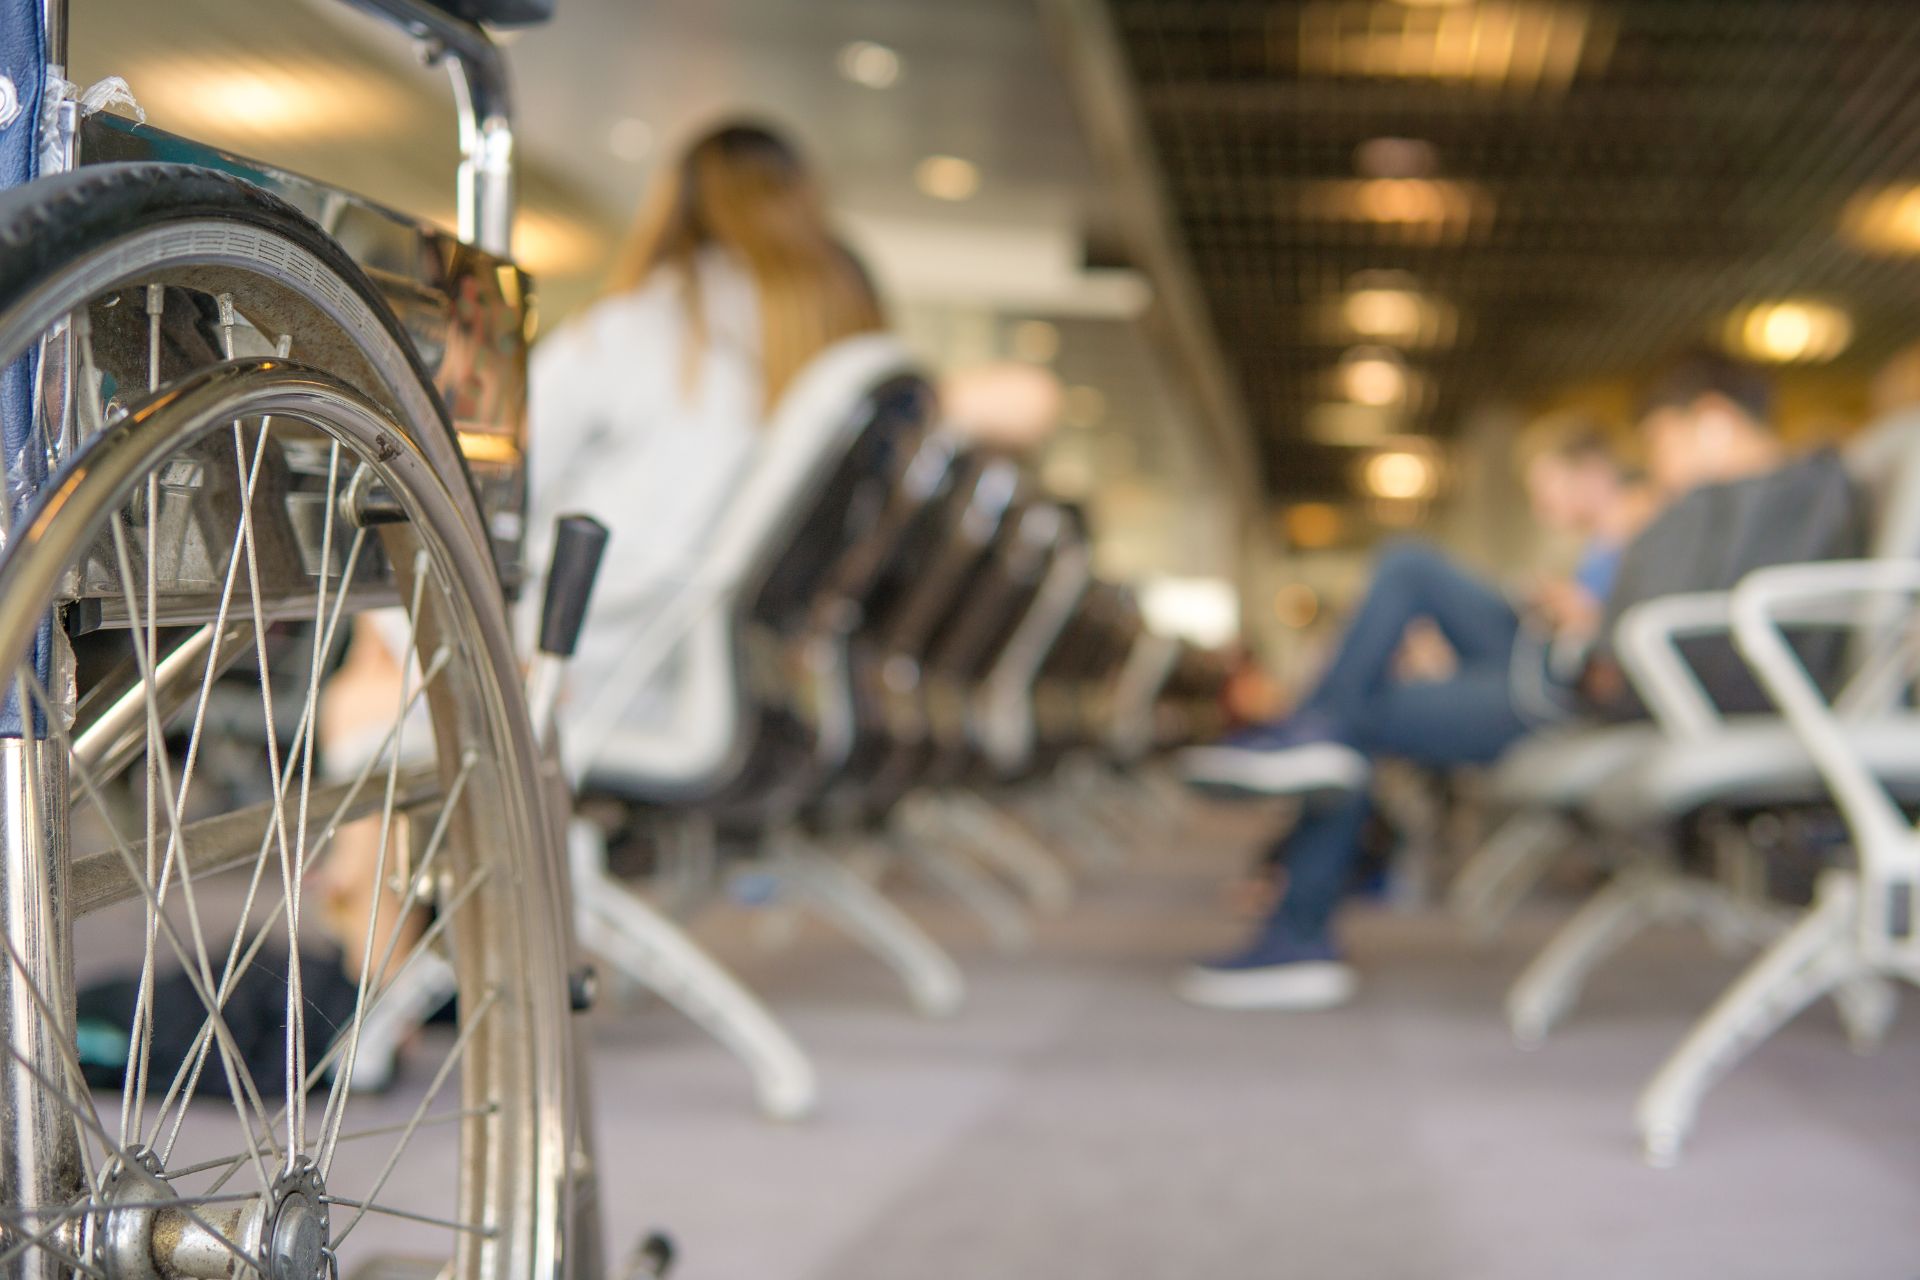 In the foreground of this airport departure area is a service wheelchair. In the background several defocussed people are waiting in the seating area for a flight.